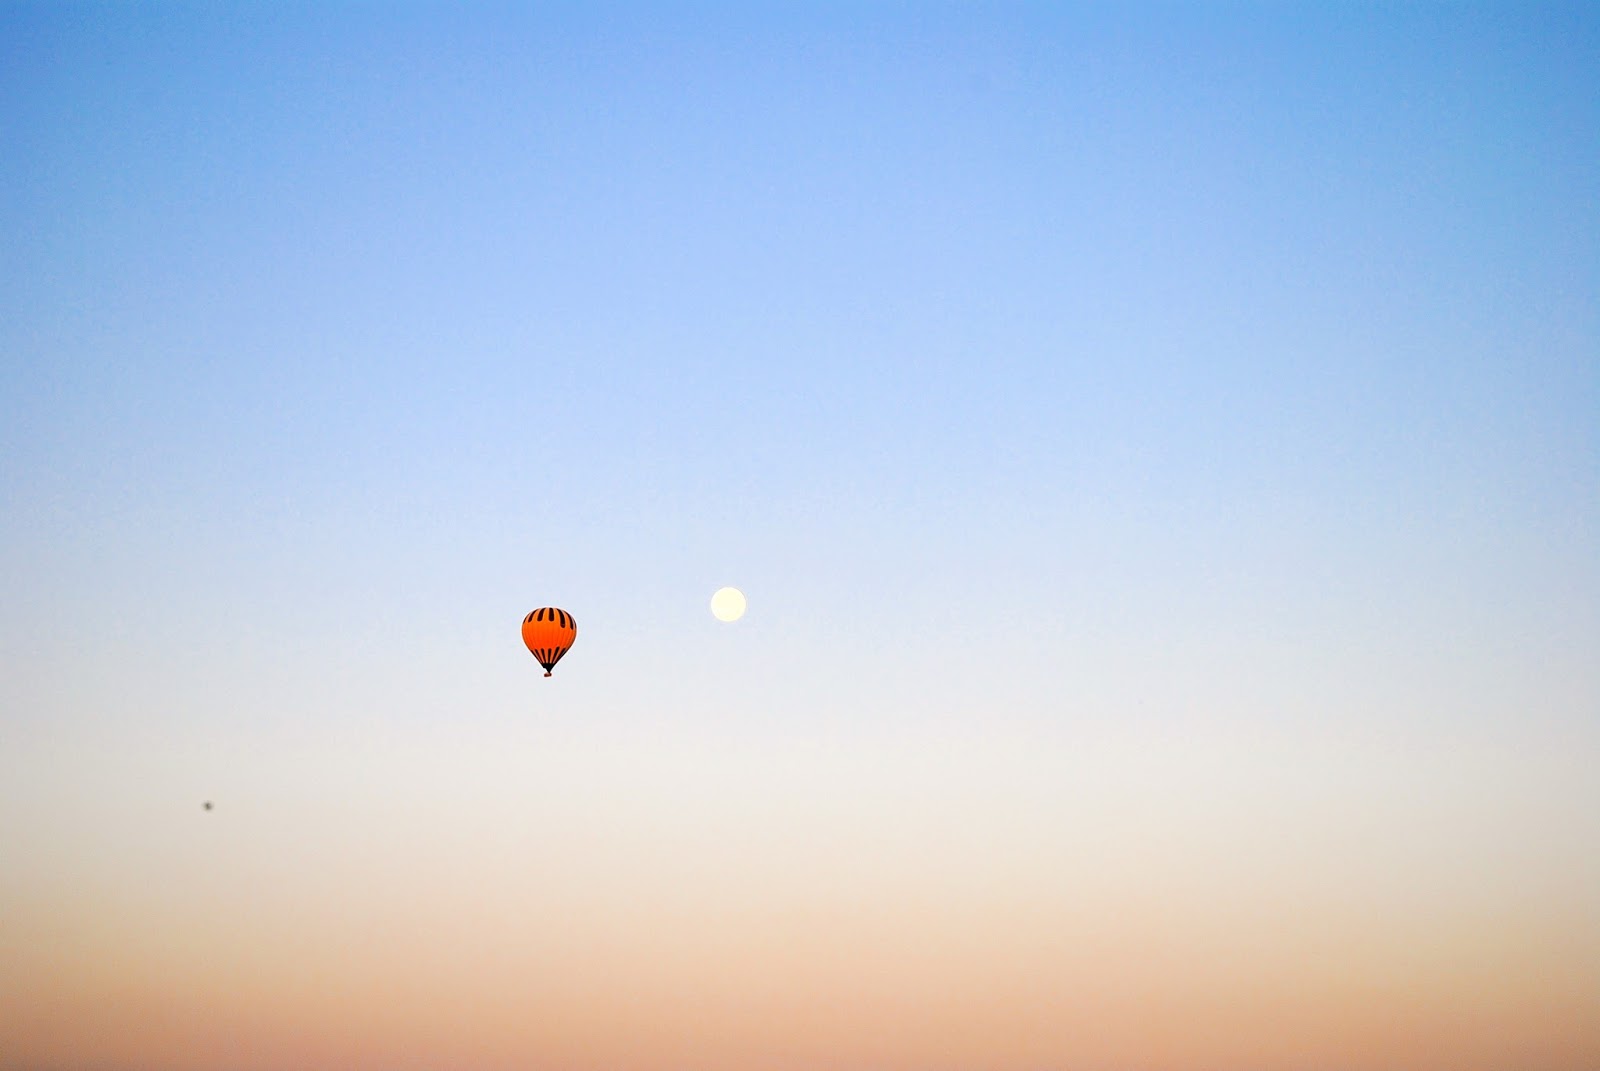 Hot Air Ballooning over Cappadocia at Sunrise with Butterfly Balloons